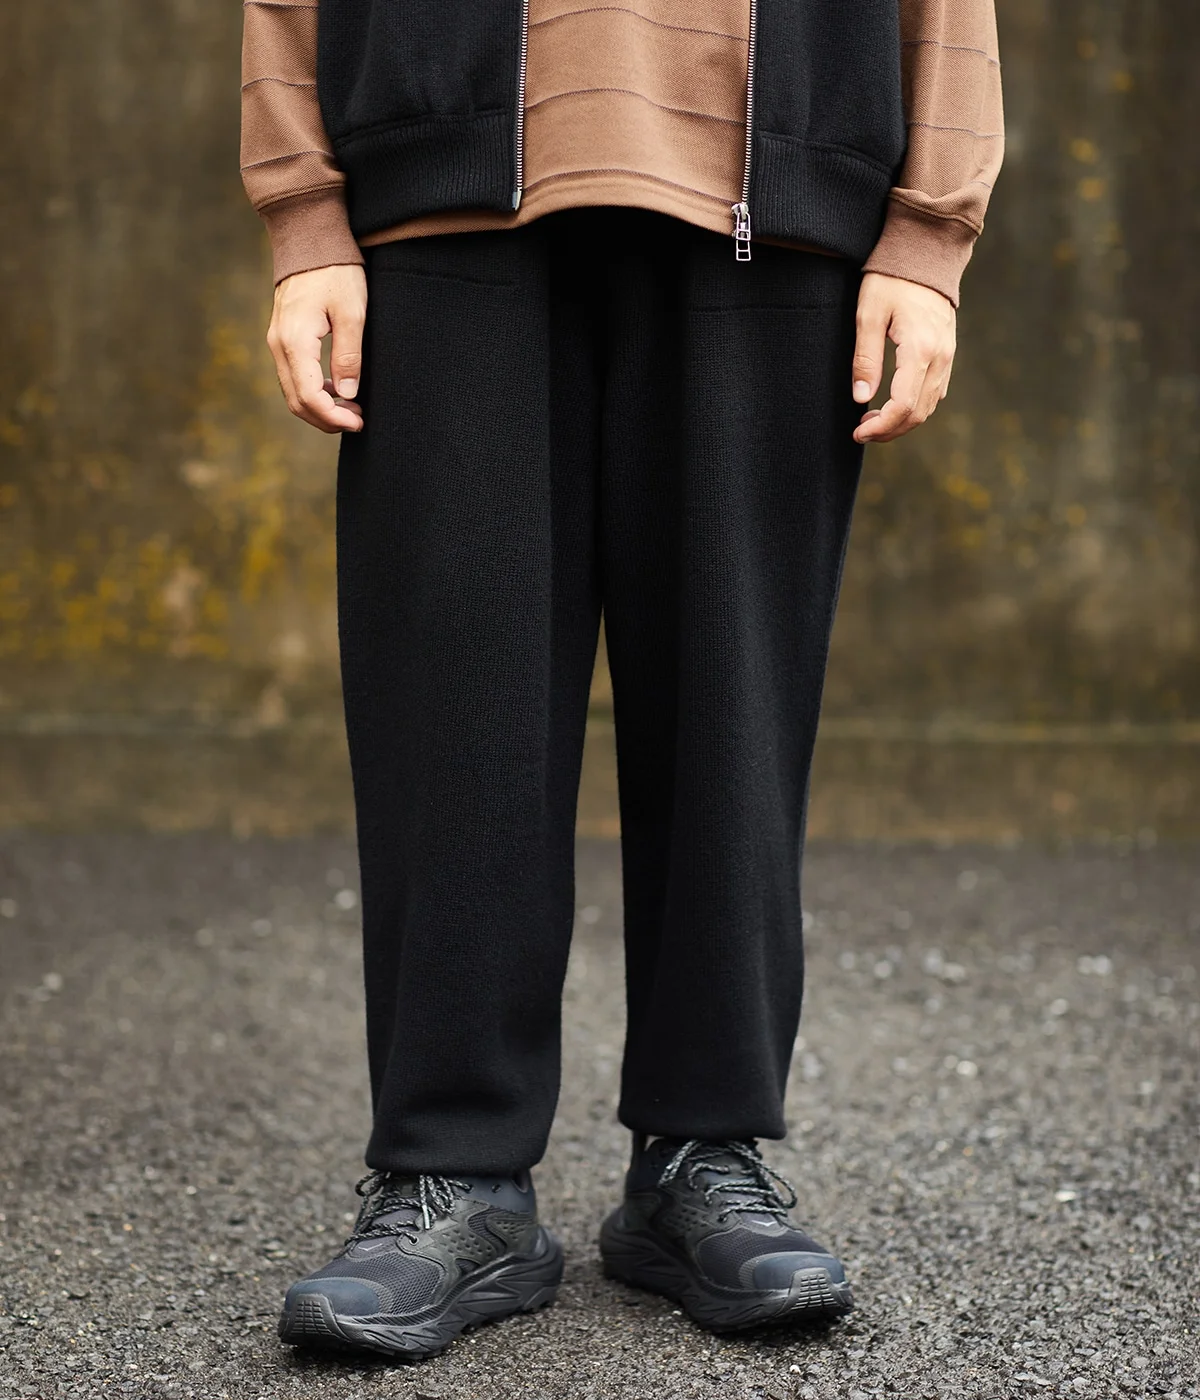 ONLY ARK】別注 Wholegarment Knit Pants | crepuscule(クレプス 